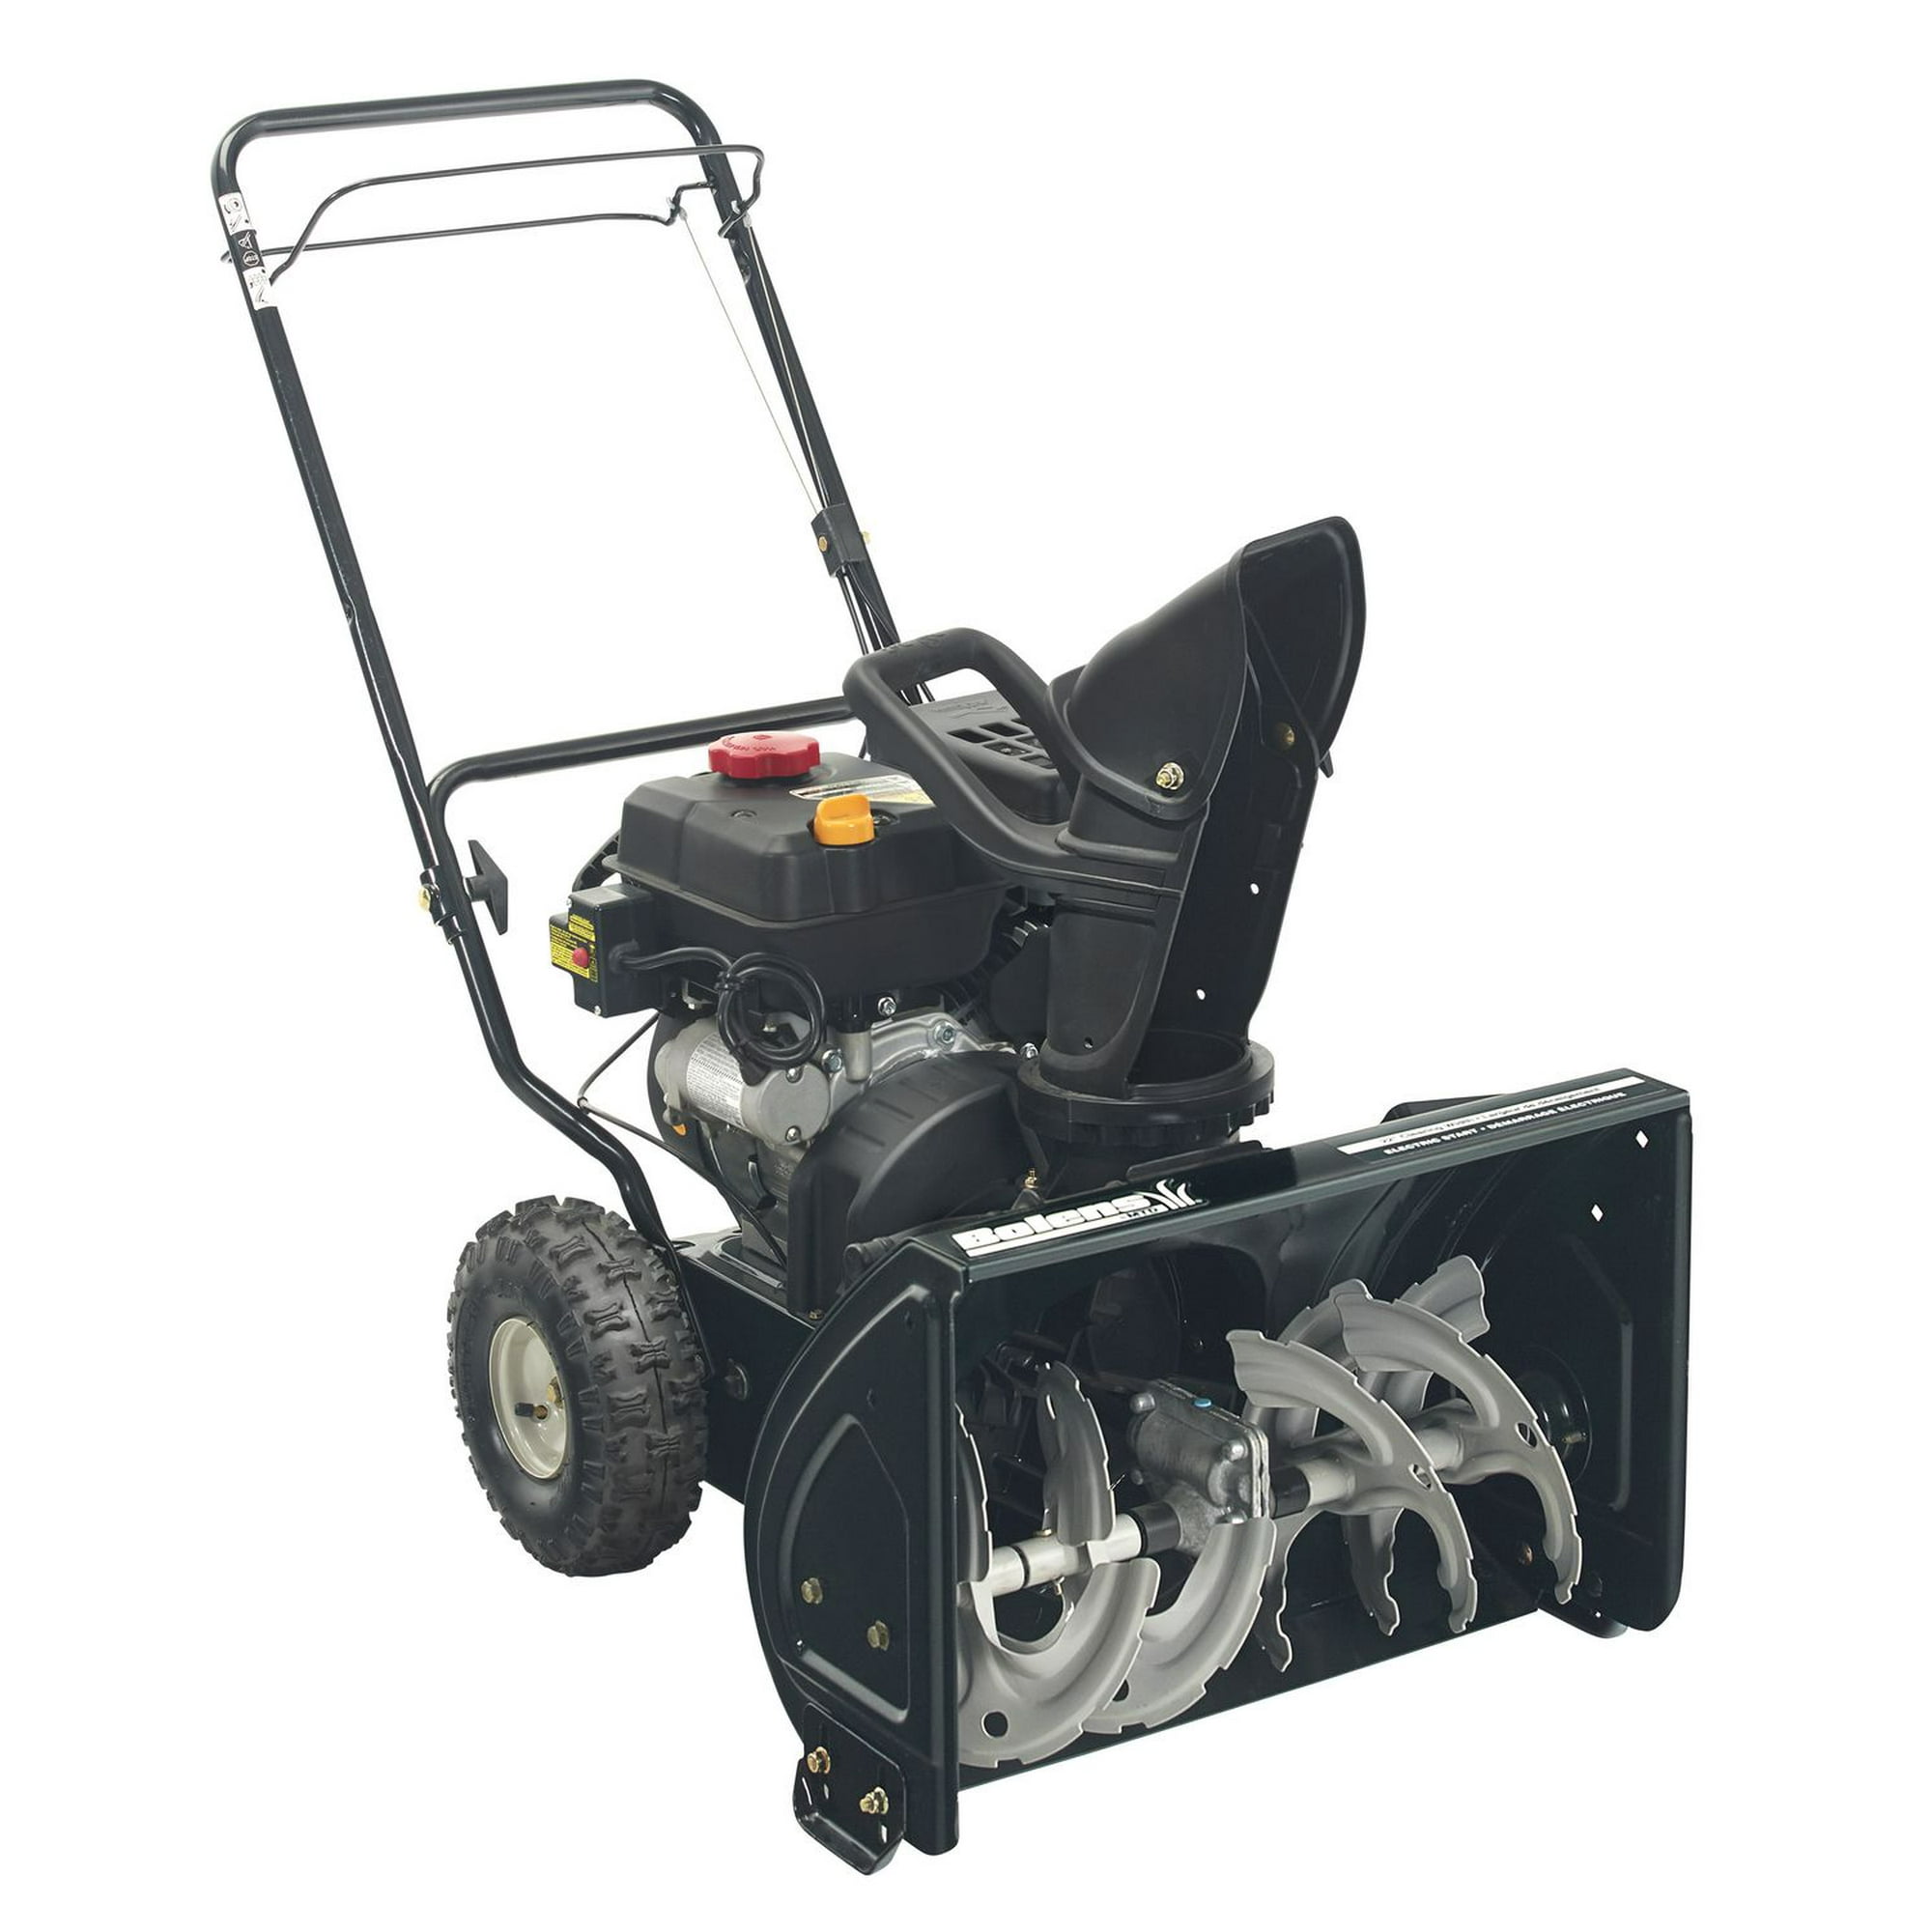 Bolens 22 Inch Two-Stage Snow Blower 